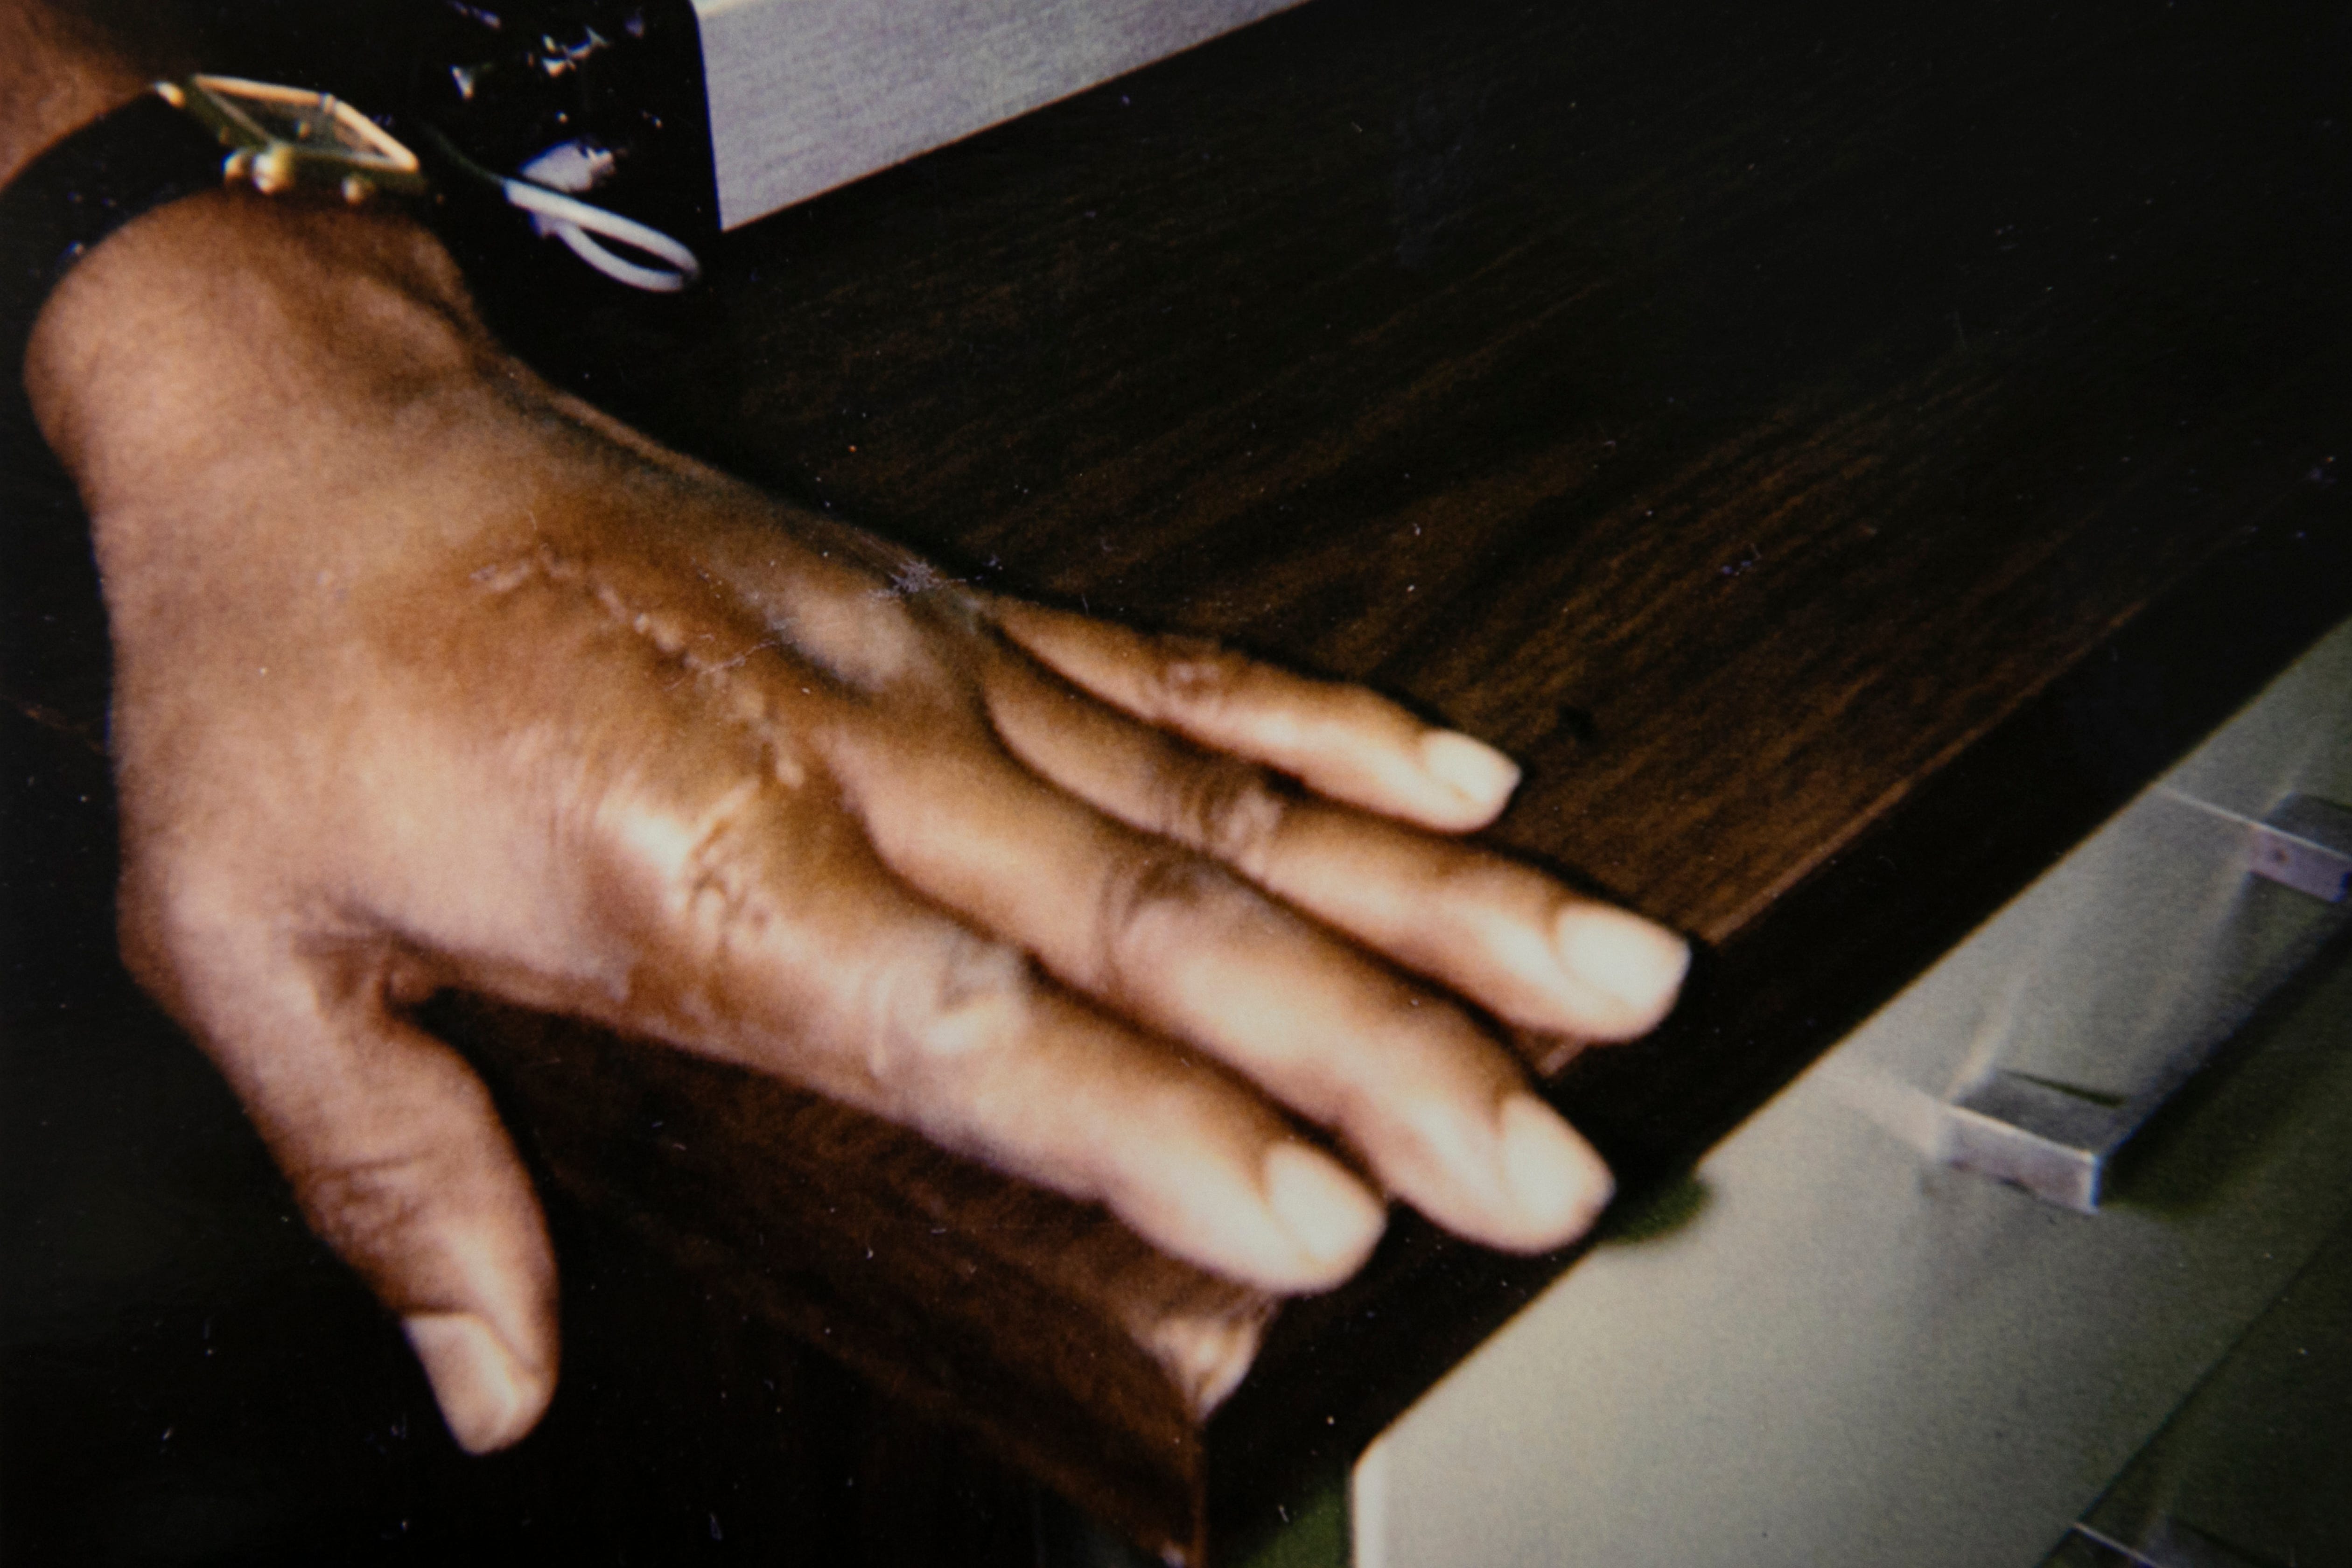 A photograph from police evidence files showing a wound on Elwood Jones's hand.